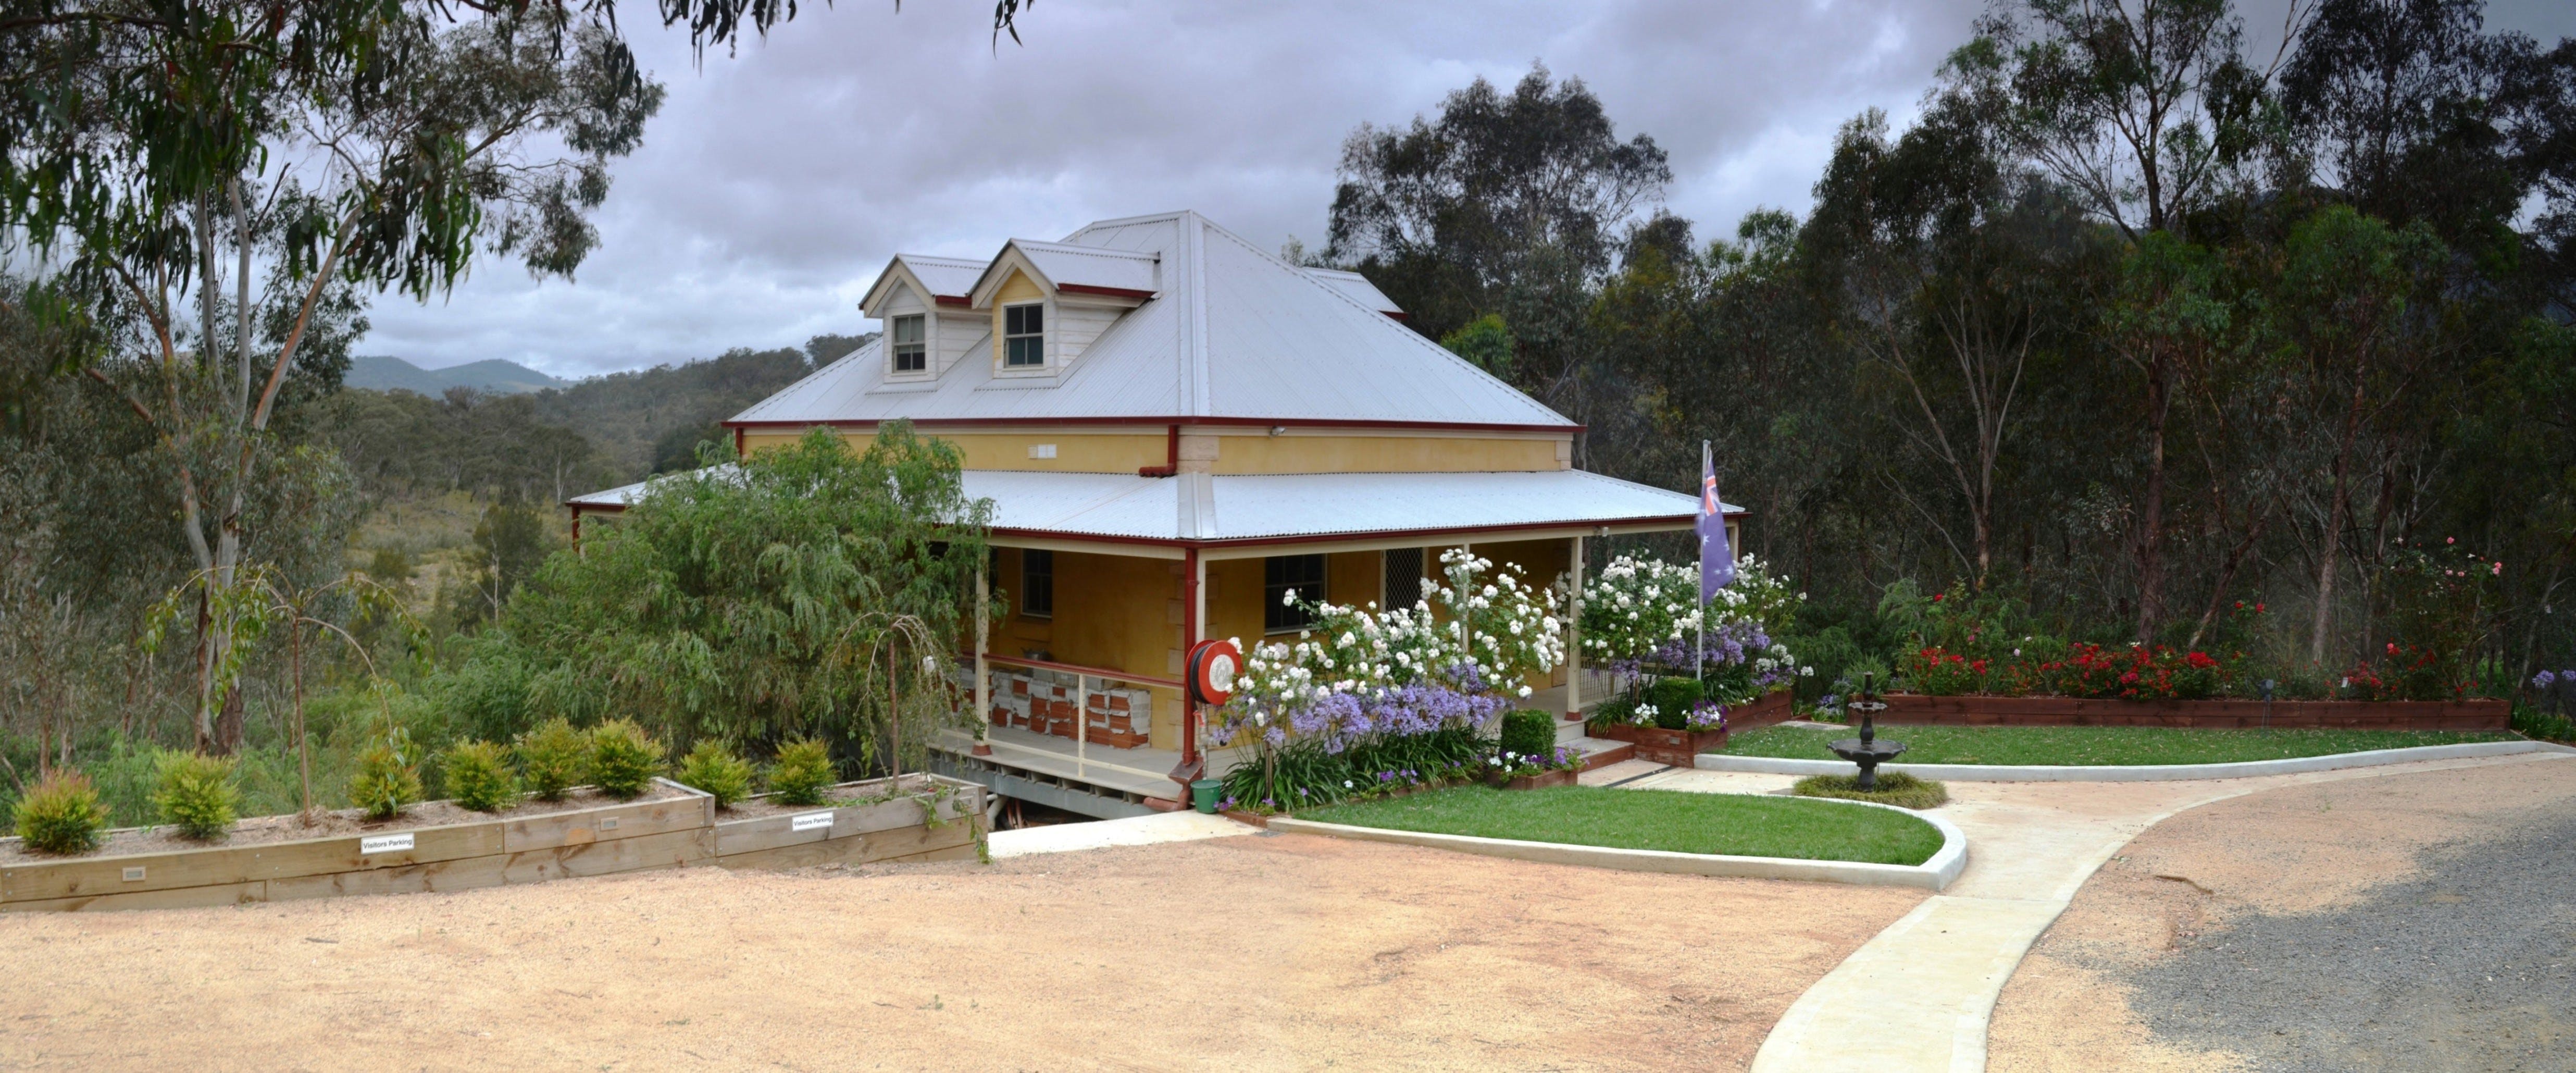 Tanwarra Lodge Bed and Breakfast - Accommodation Port Hedland